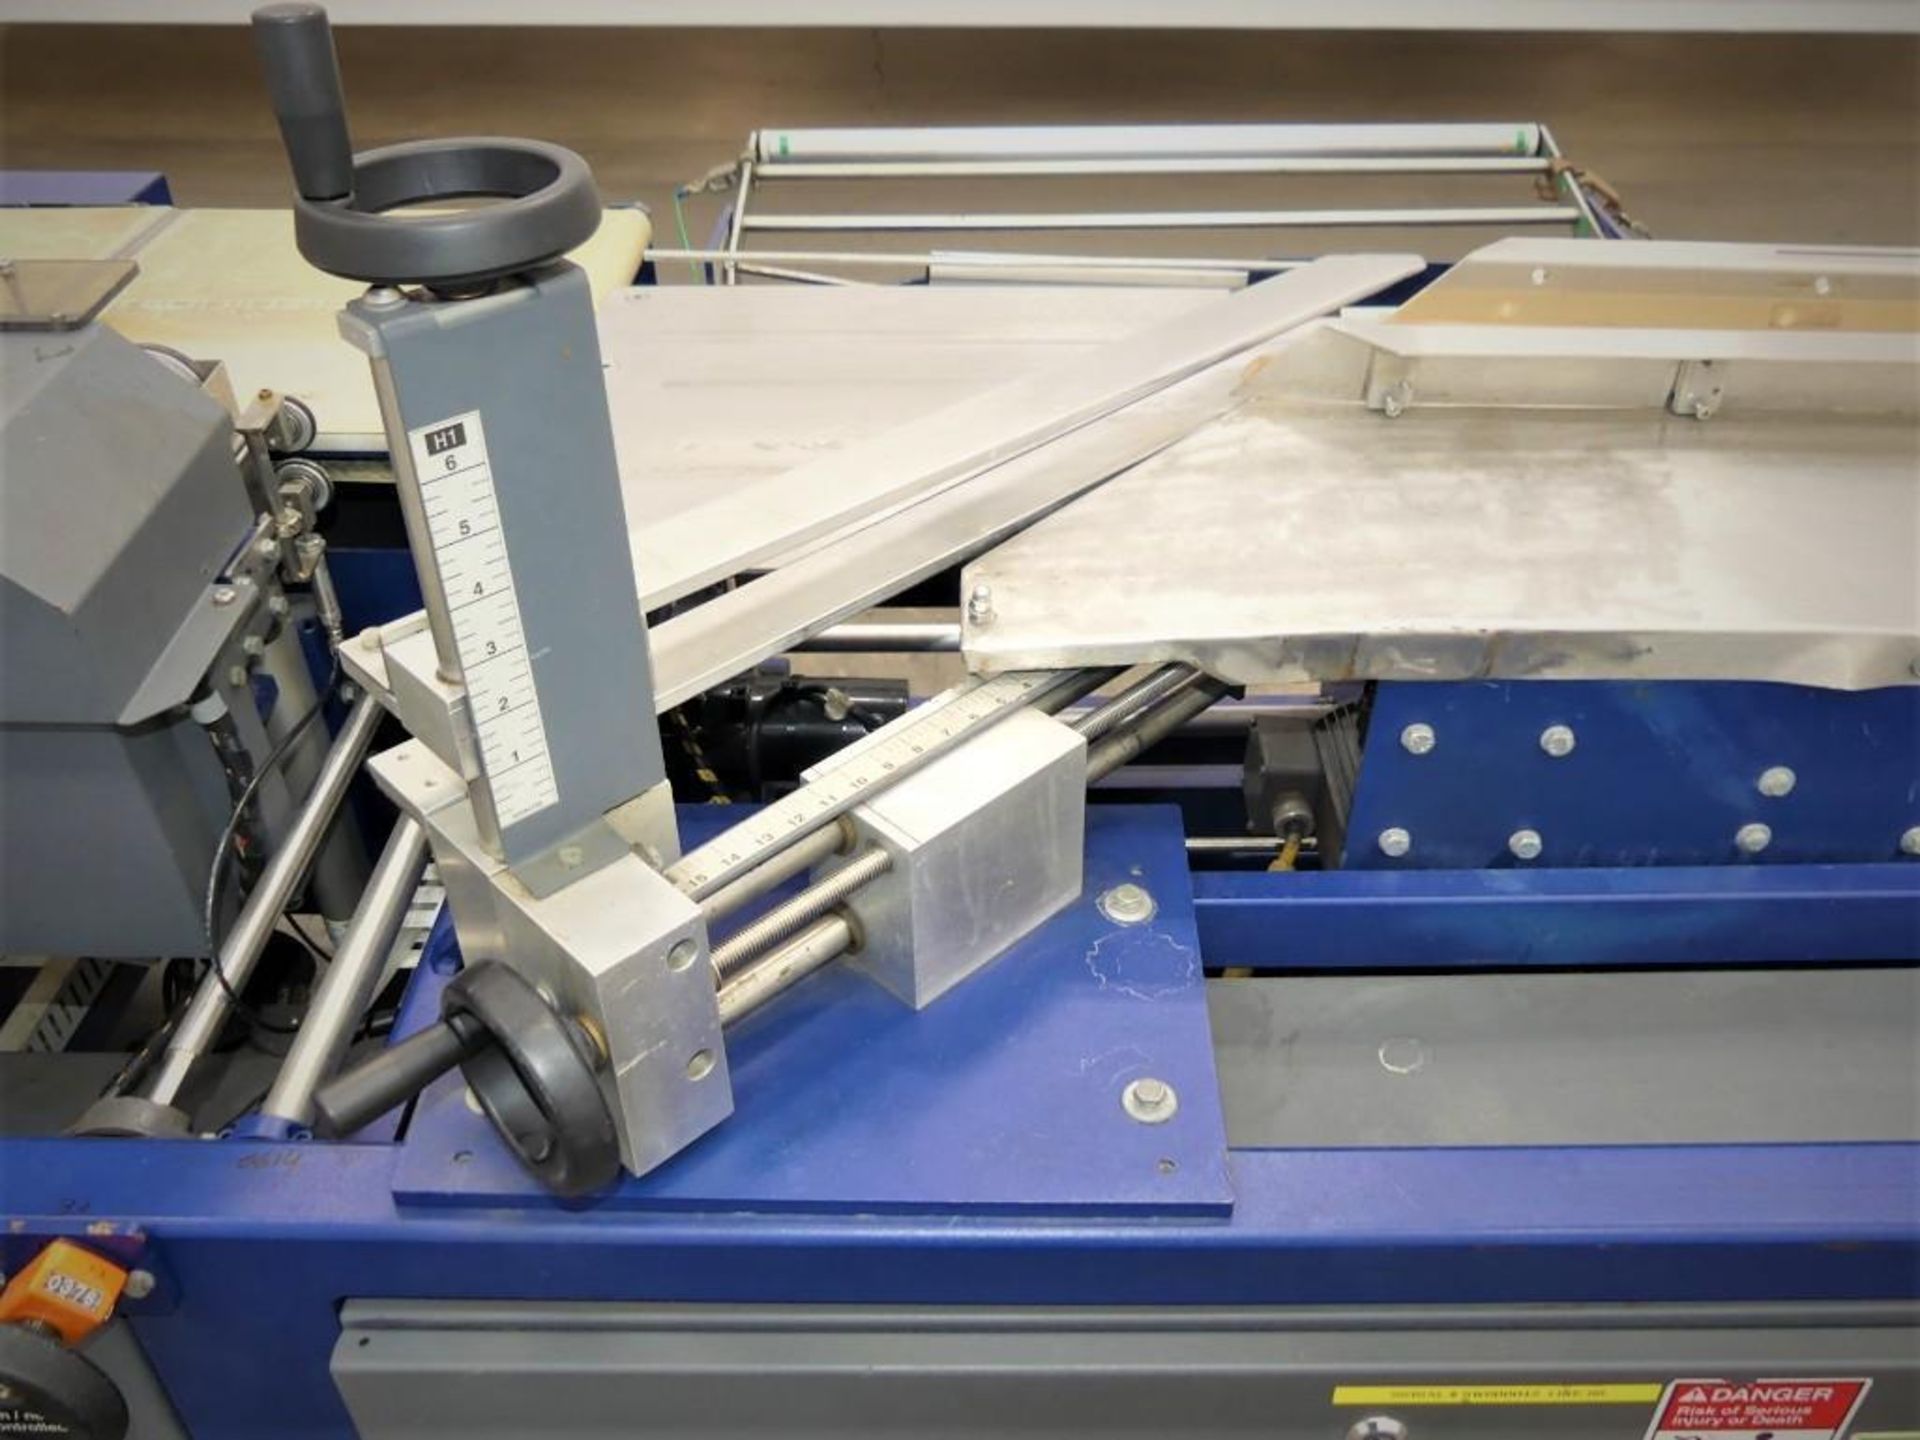 Lantech 200 Side Sealer Includes all parts, electronic components, manuals, etc - Image 7 of 17